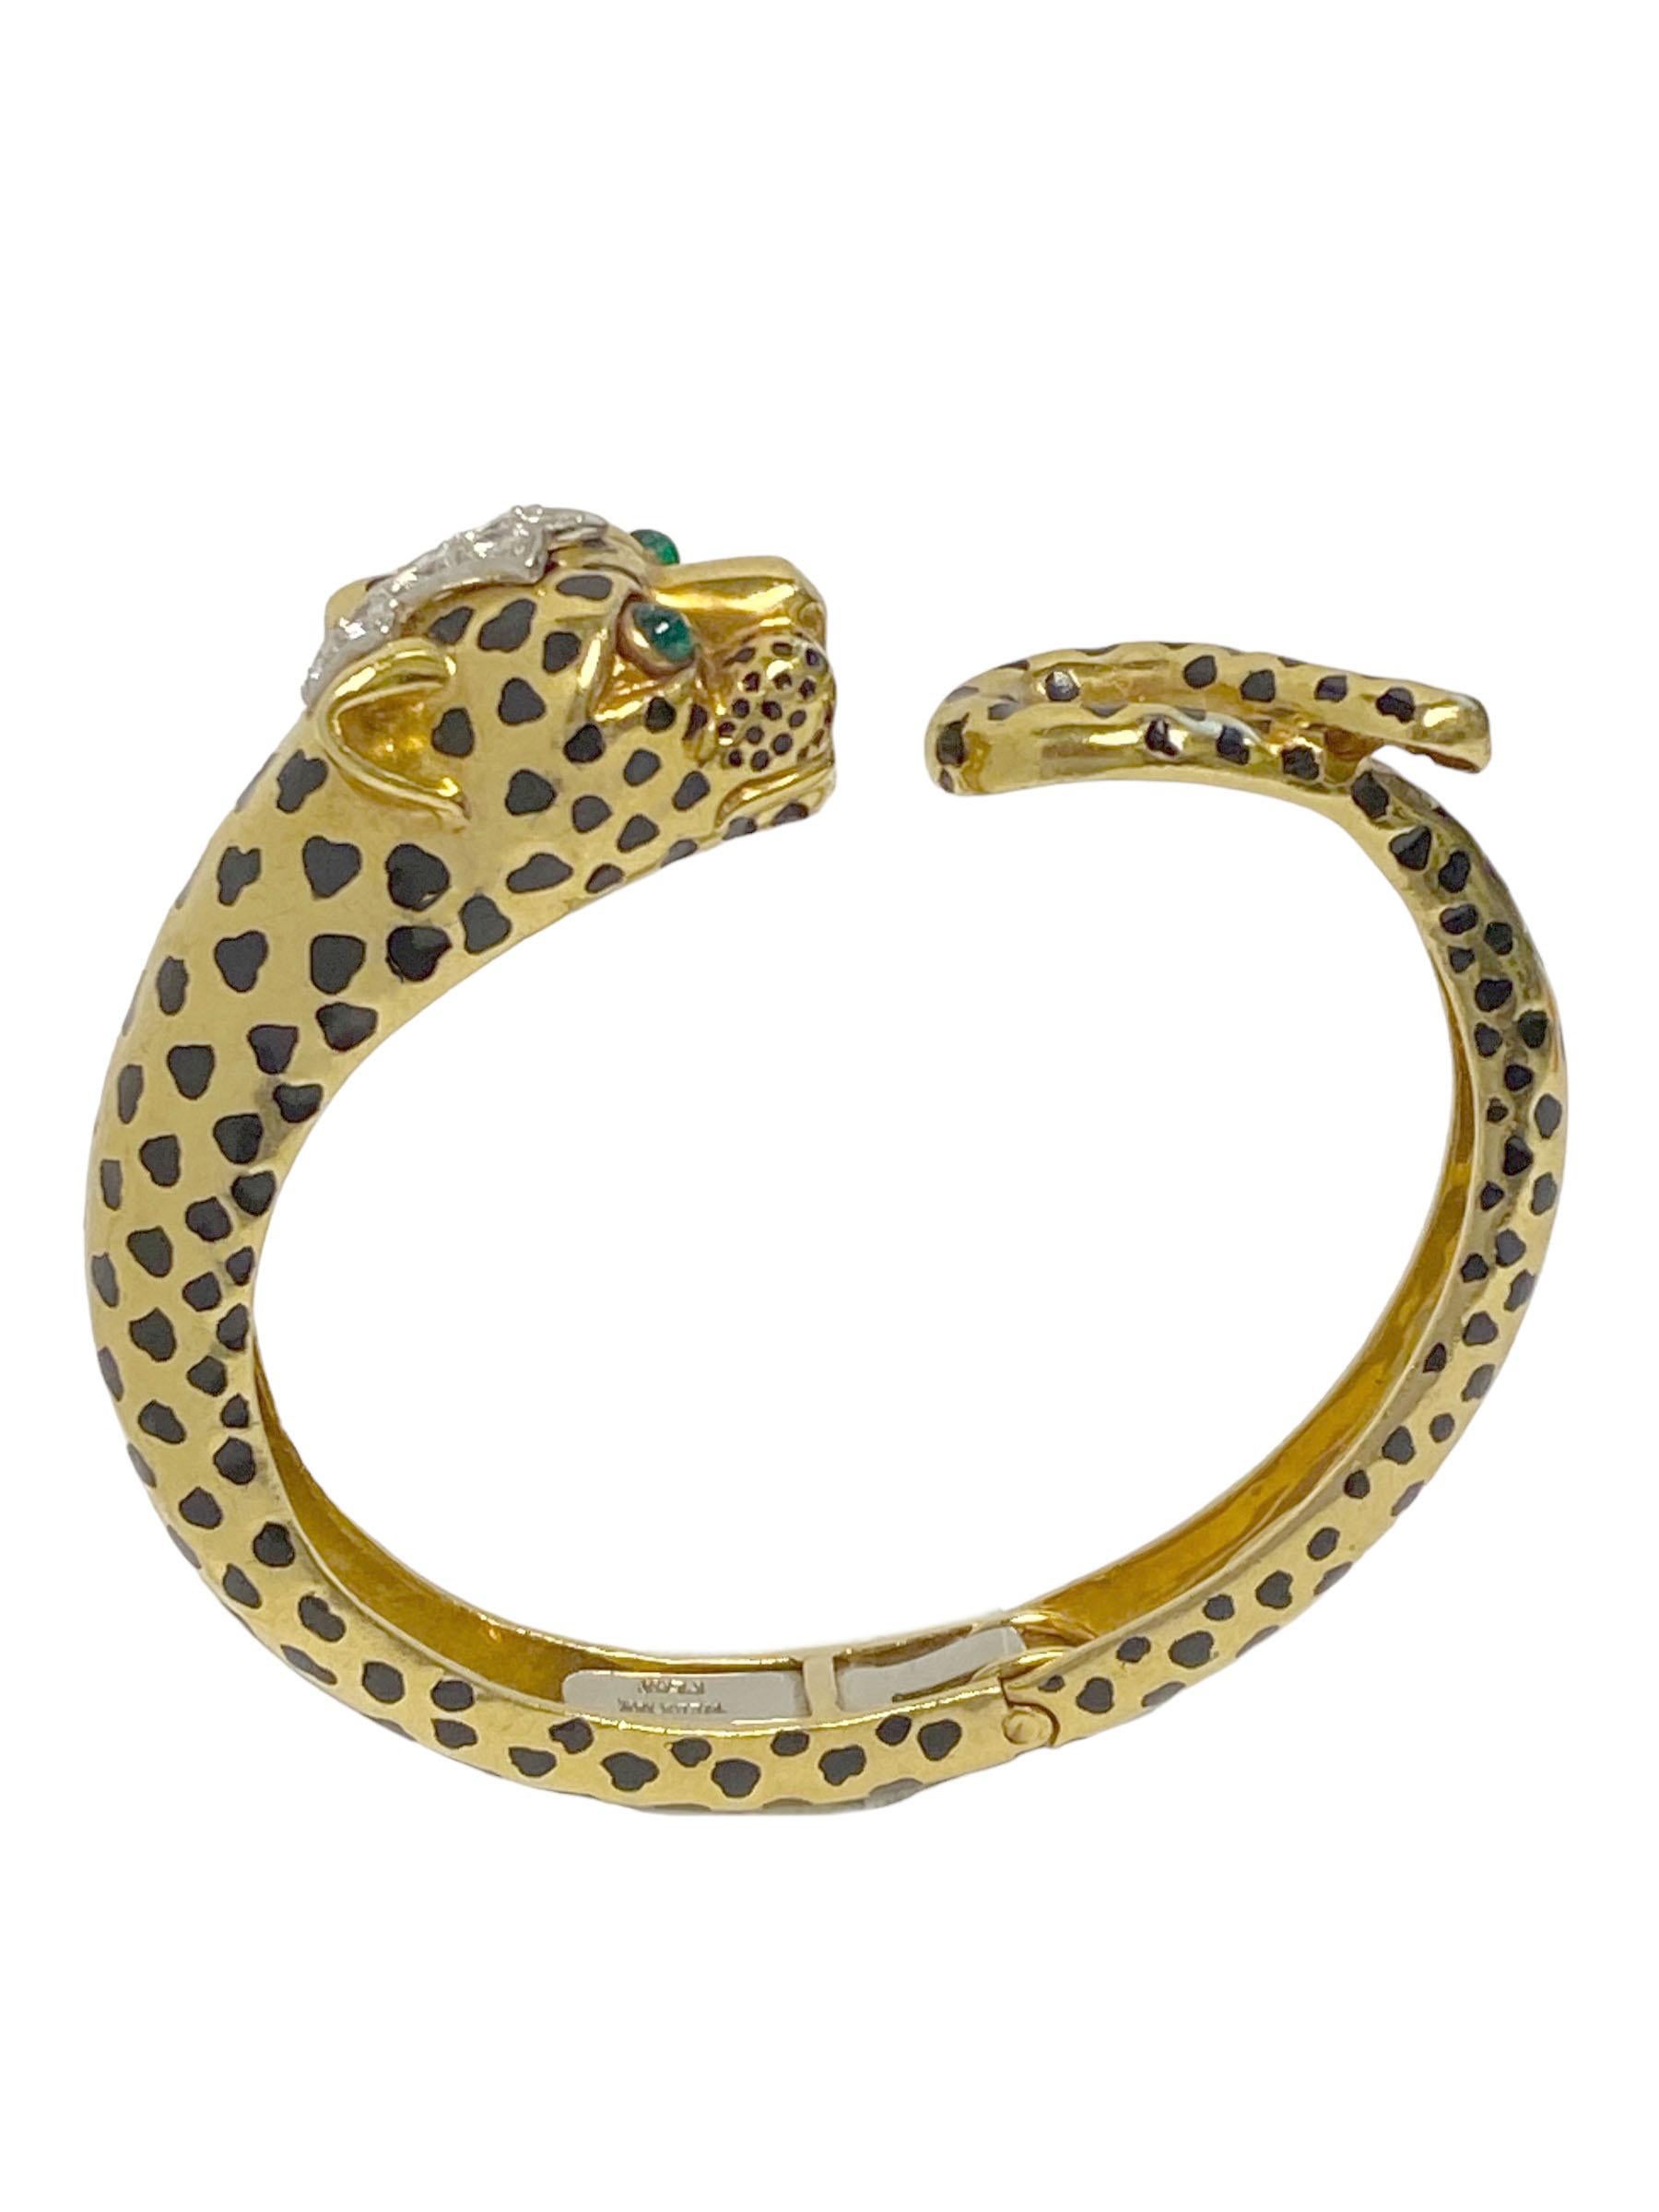 David Webb Iconic Yellow Gold Platinum and Gem Set Leopard Bangle Bracelet In Excellent Condition For Sale In Chicago, IL